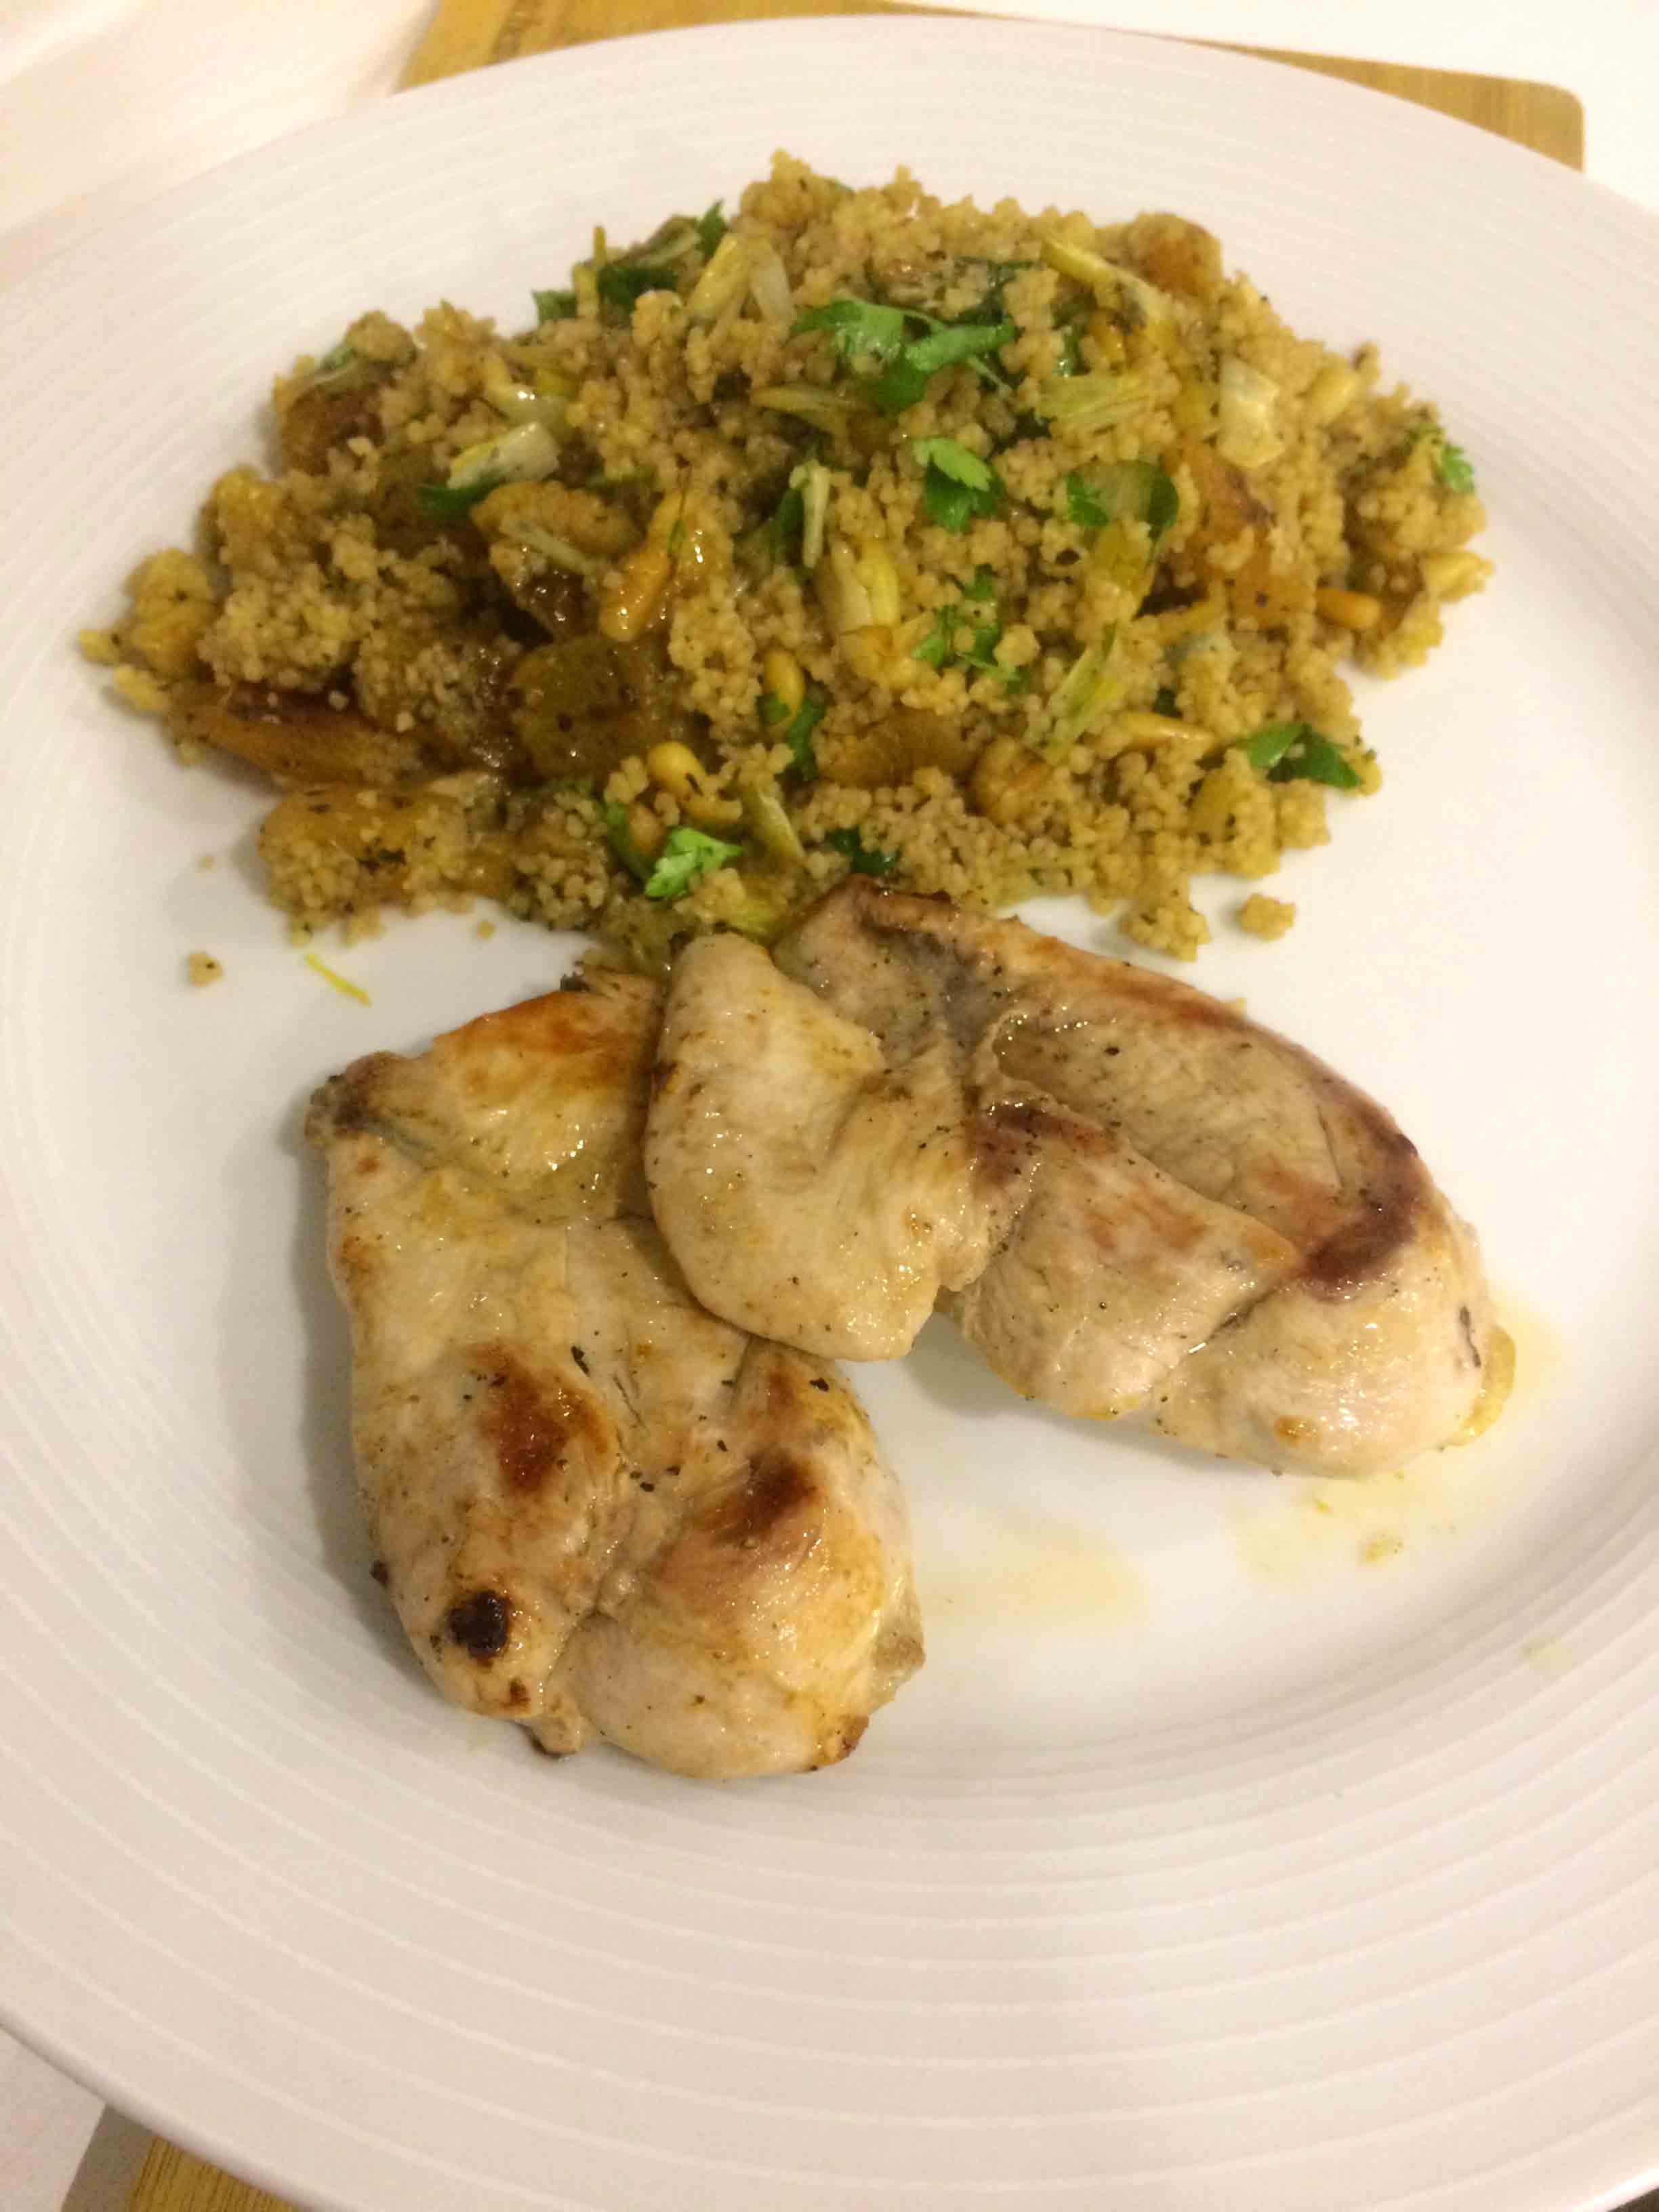 couscous salad with partridge served on a plate.